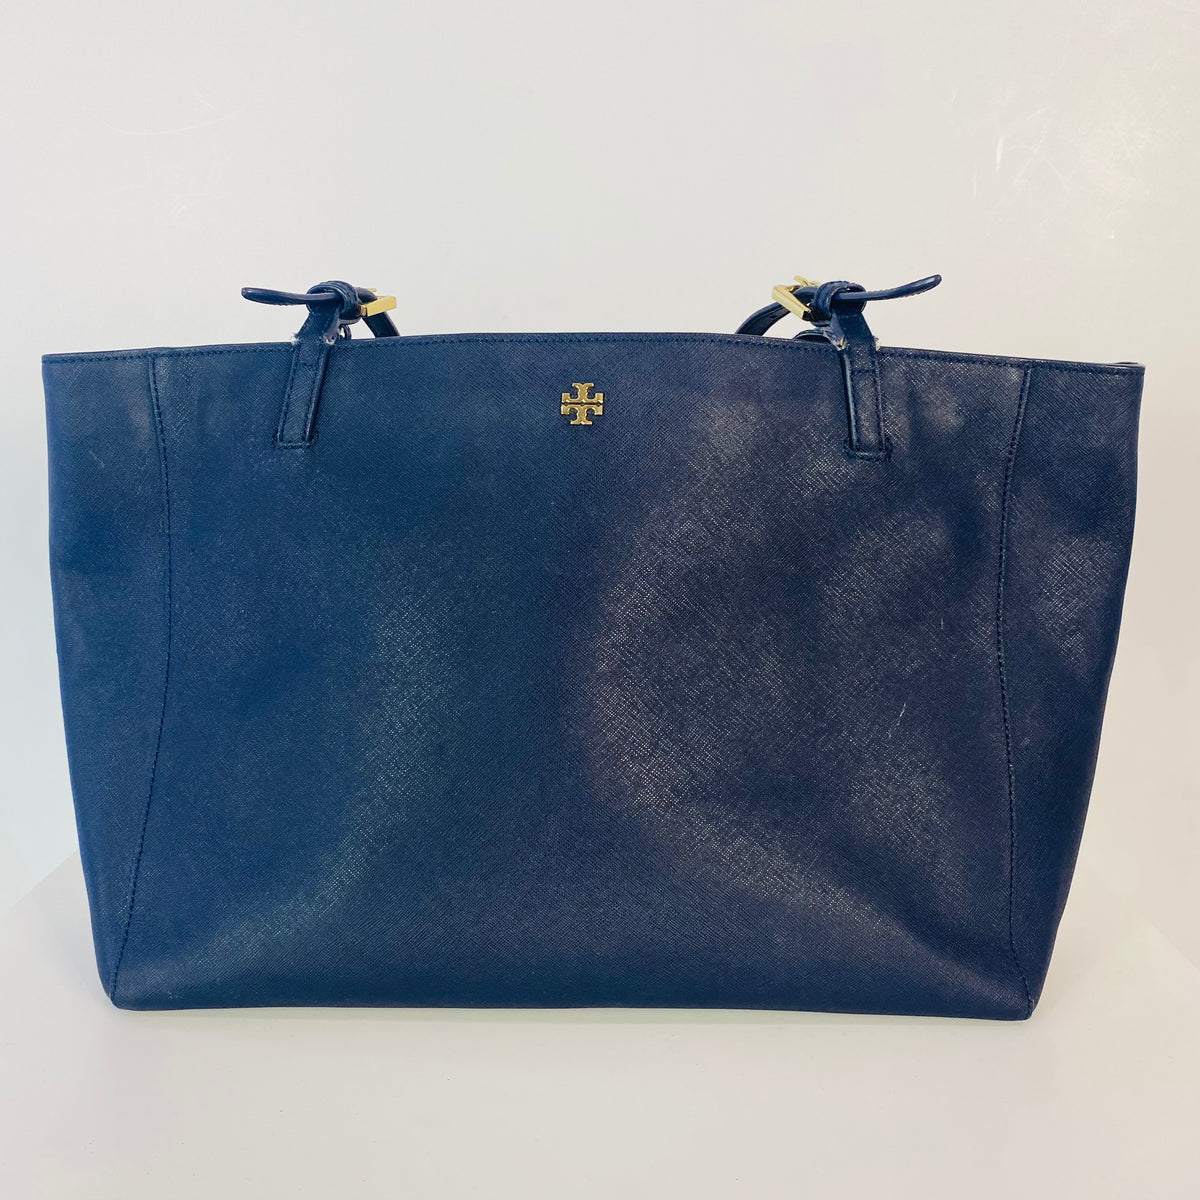 Tory Burch, Bags, Tory Burch York Buckle Tote Small